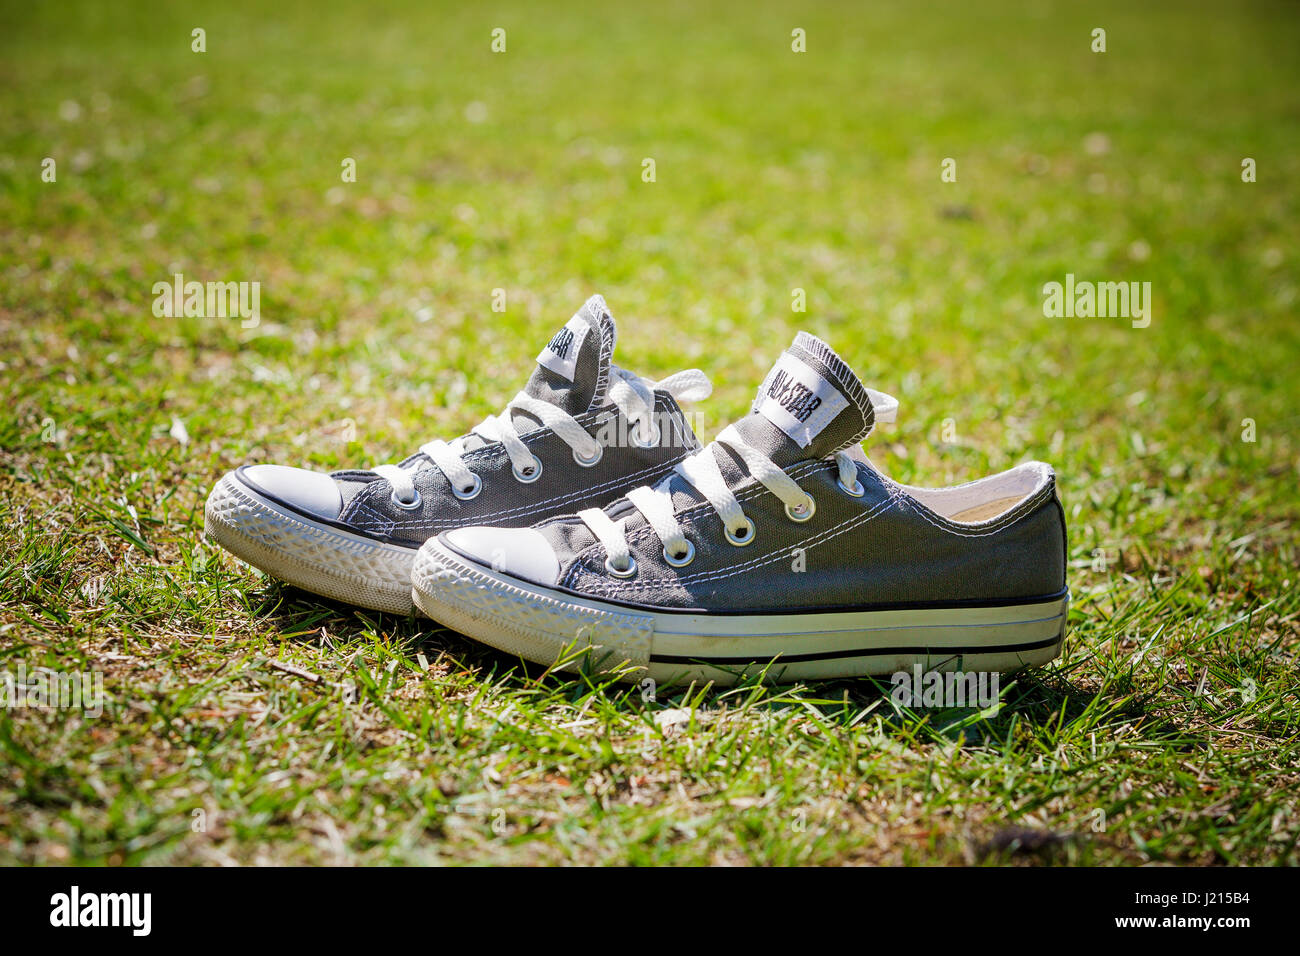 NEW FOREST, UK - 9 June 2013 - Converse All Star pumps discarded on lawn. pumps, very popular with the youth culture. On 9 June 2013 New F Stock Photo - Alamy